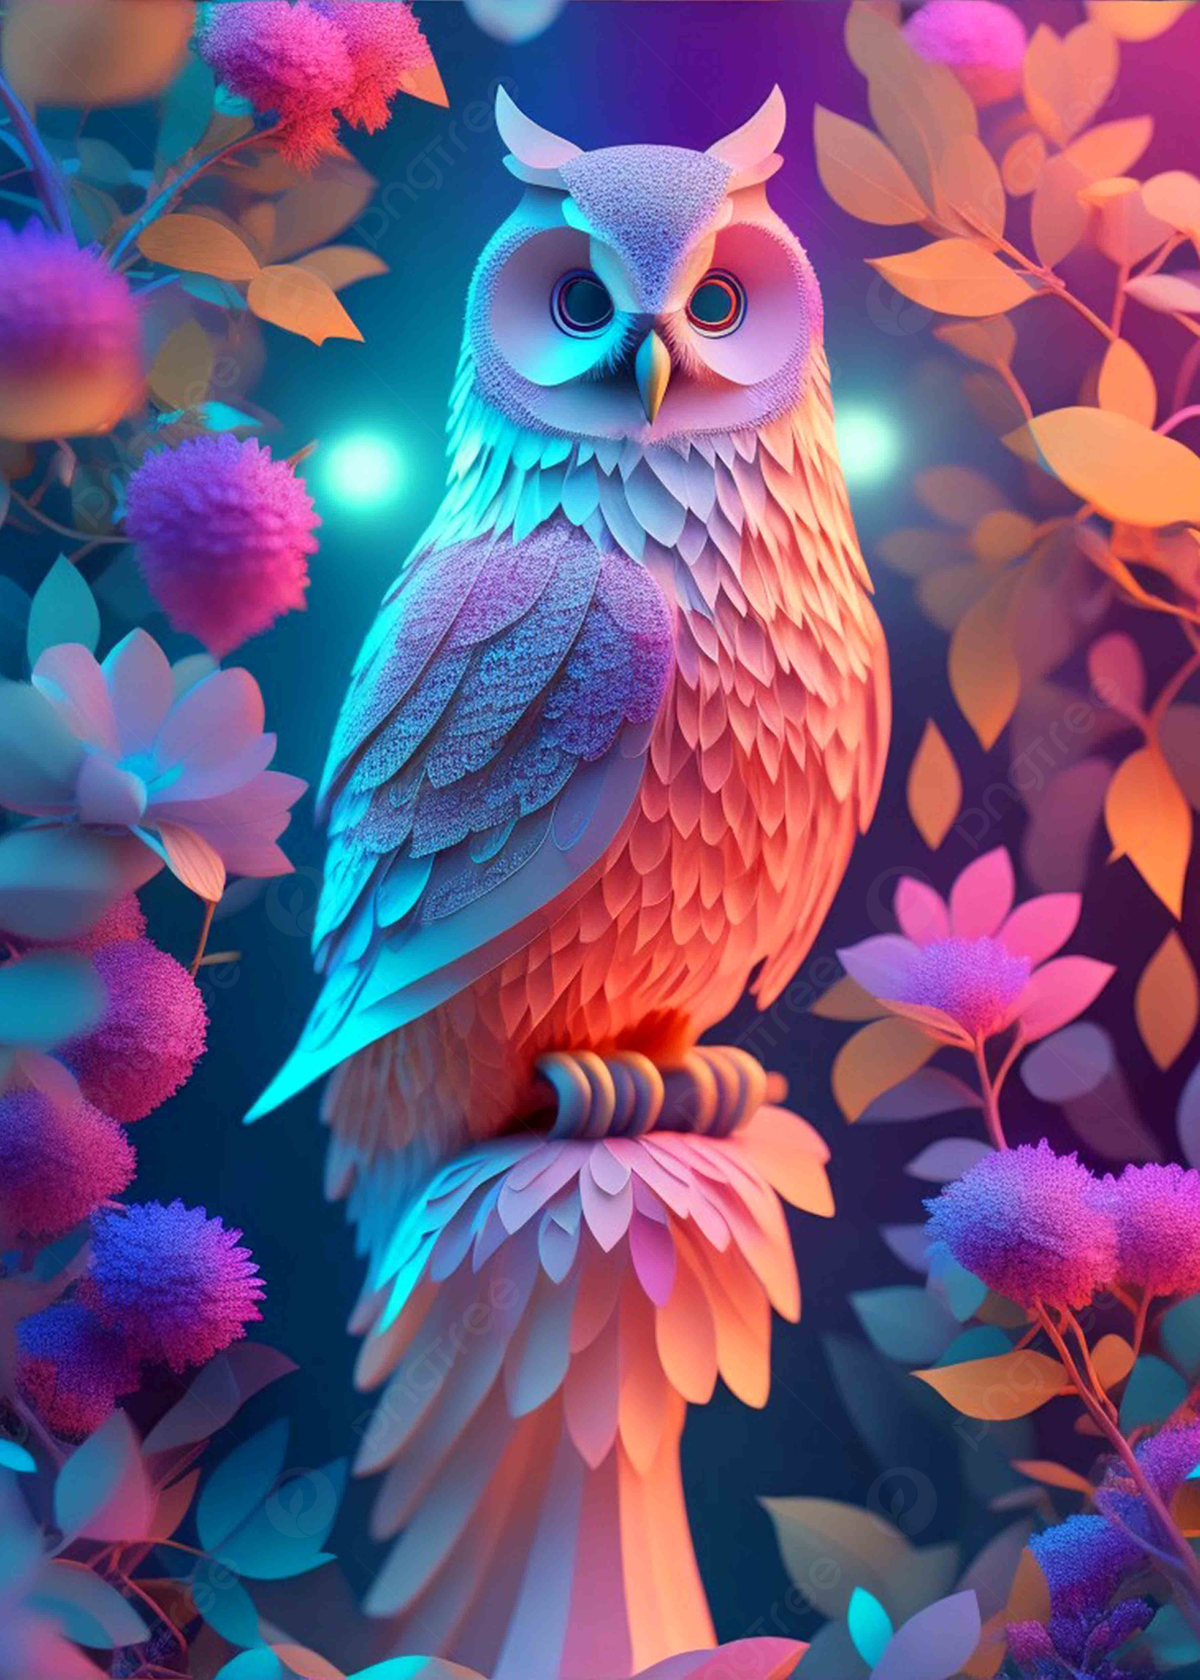 pngtree cool light background with owls in the colorful forest picture image 2499908